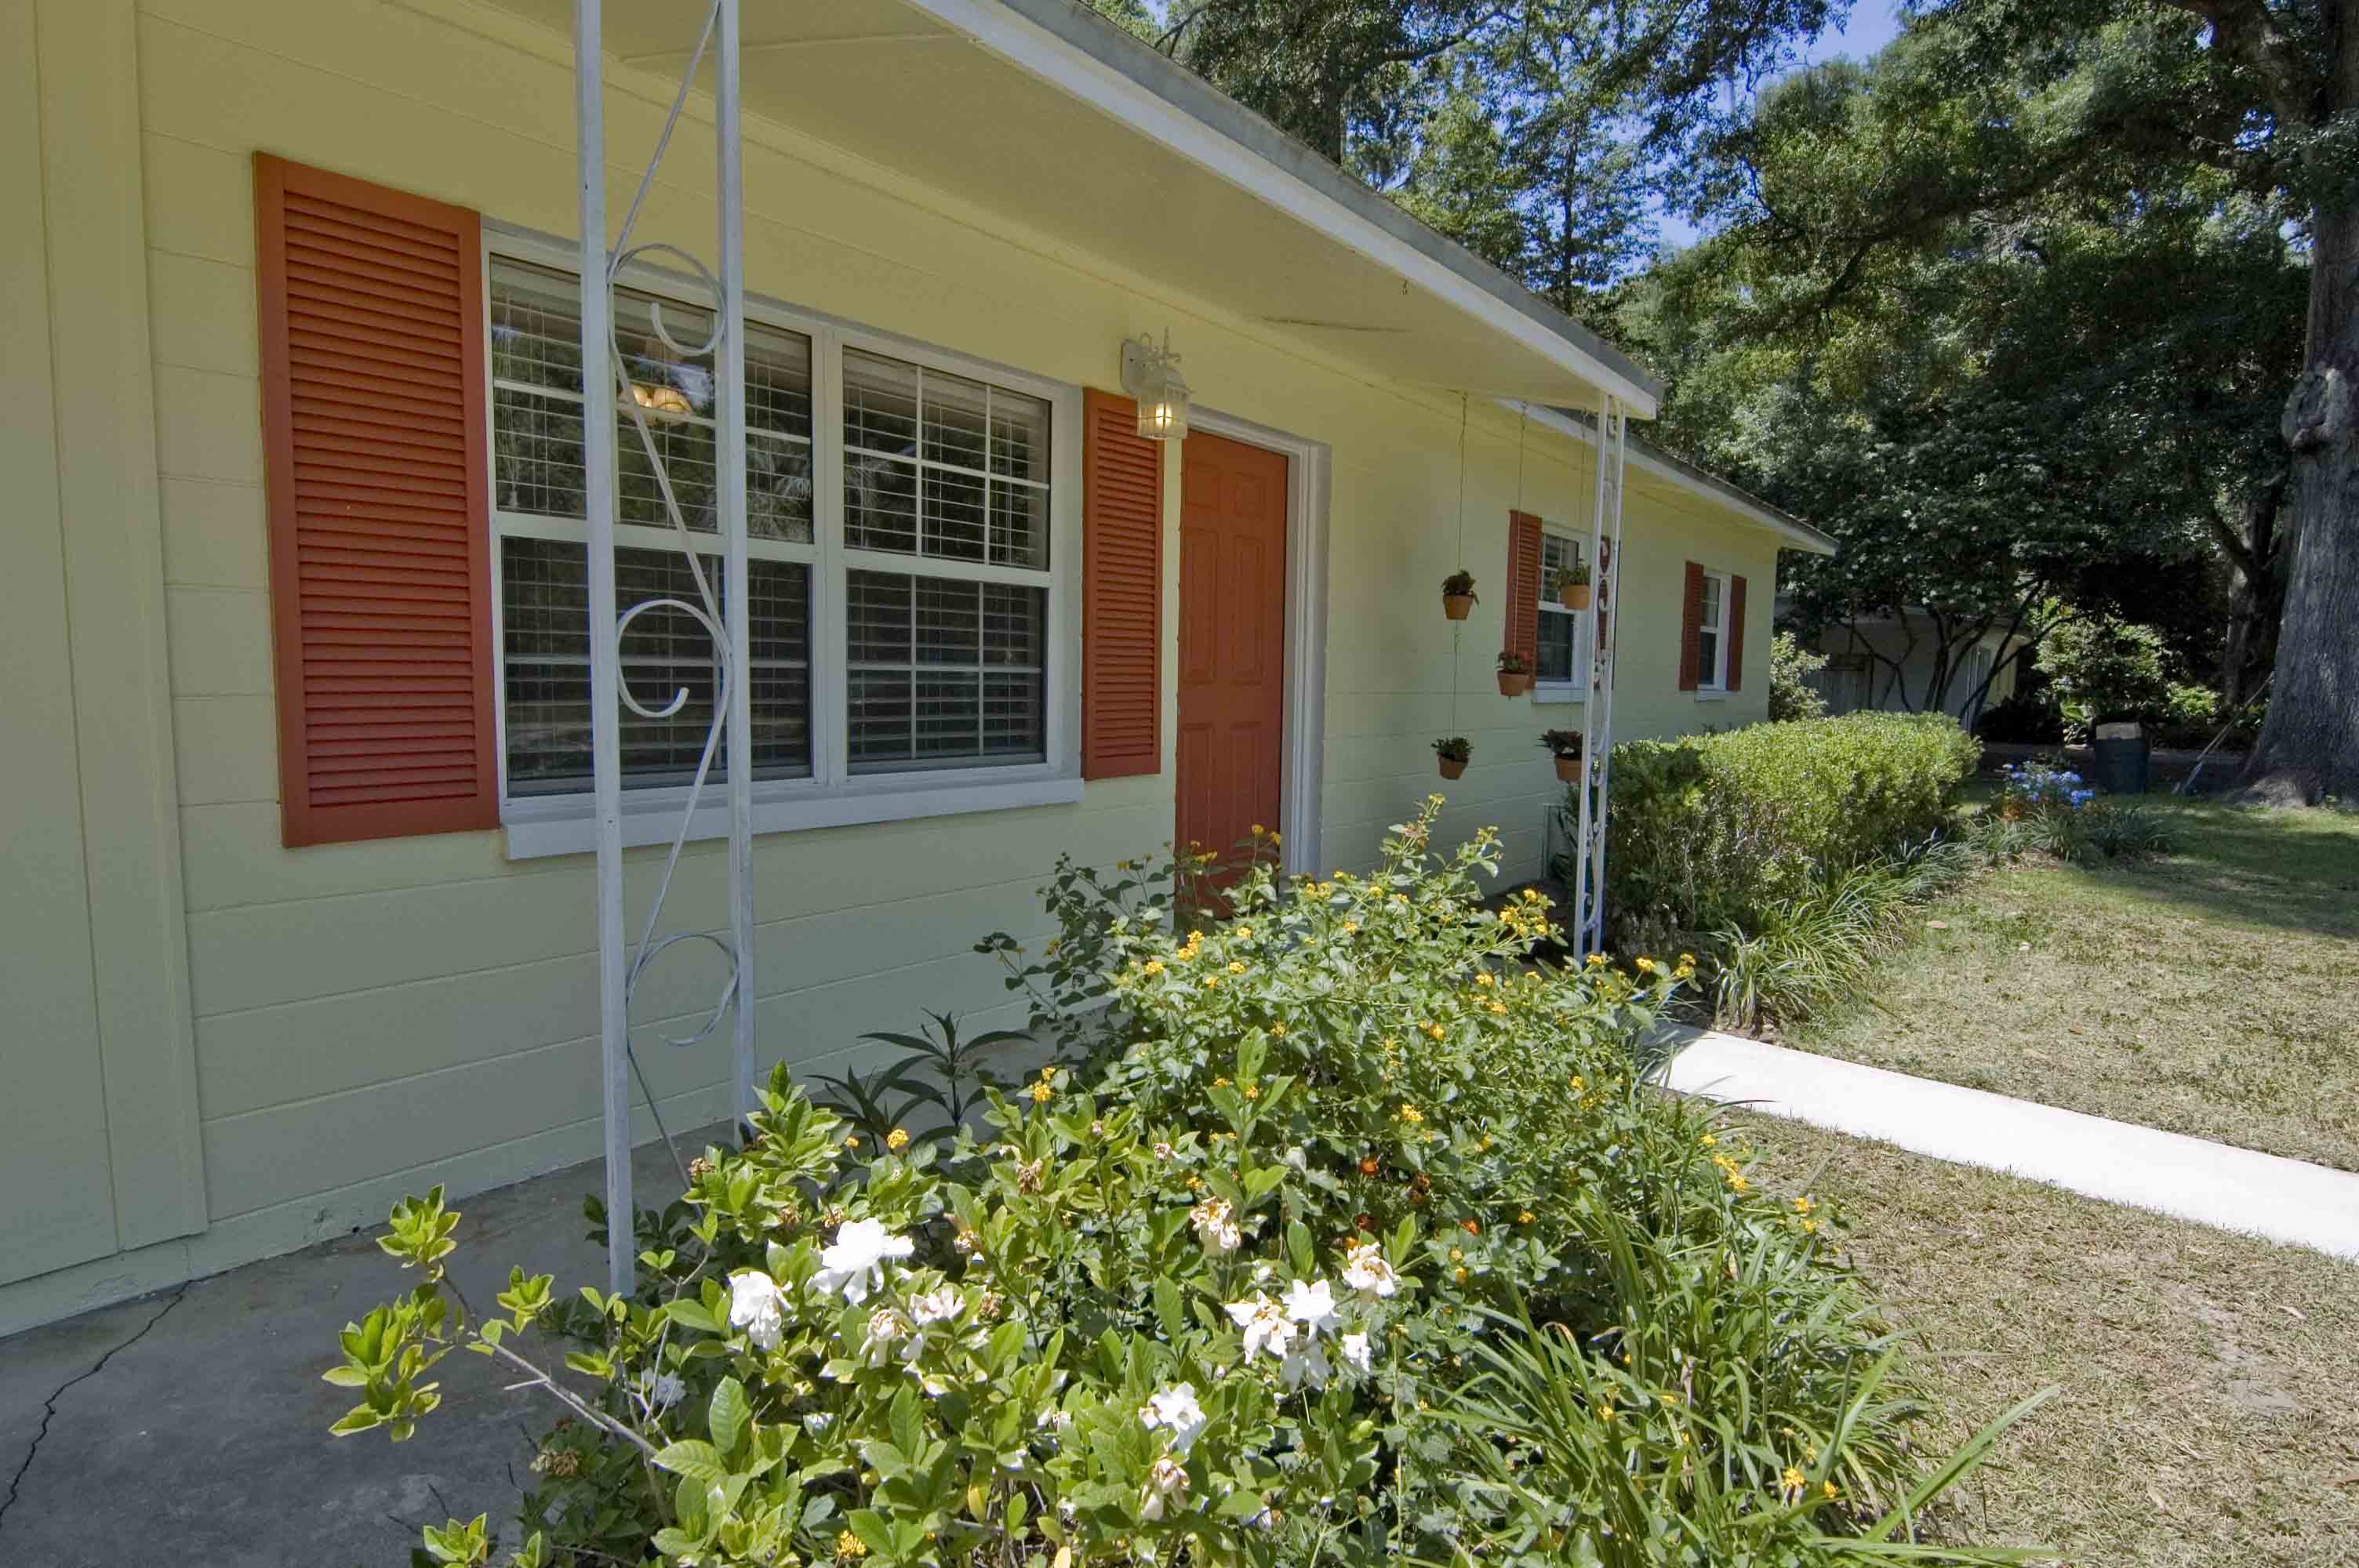 Sold: Adorable Home in NW Gainesville